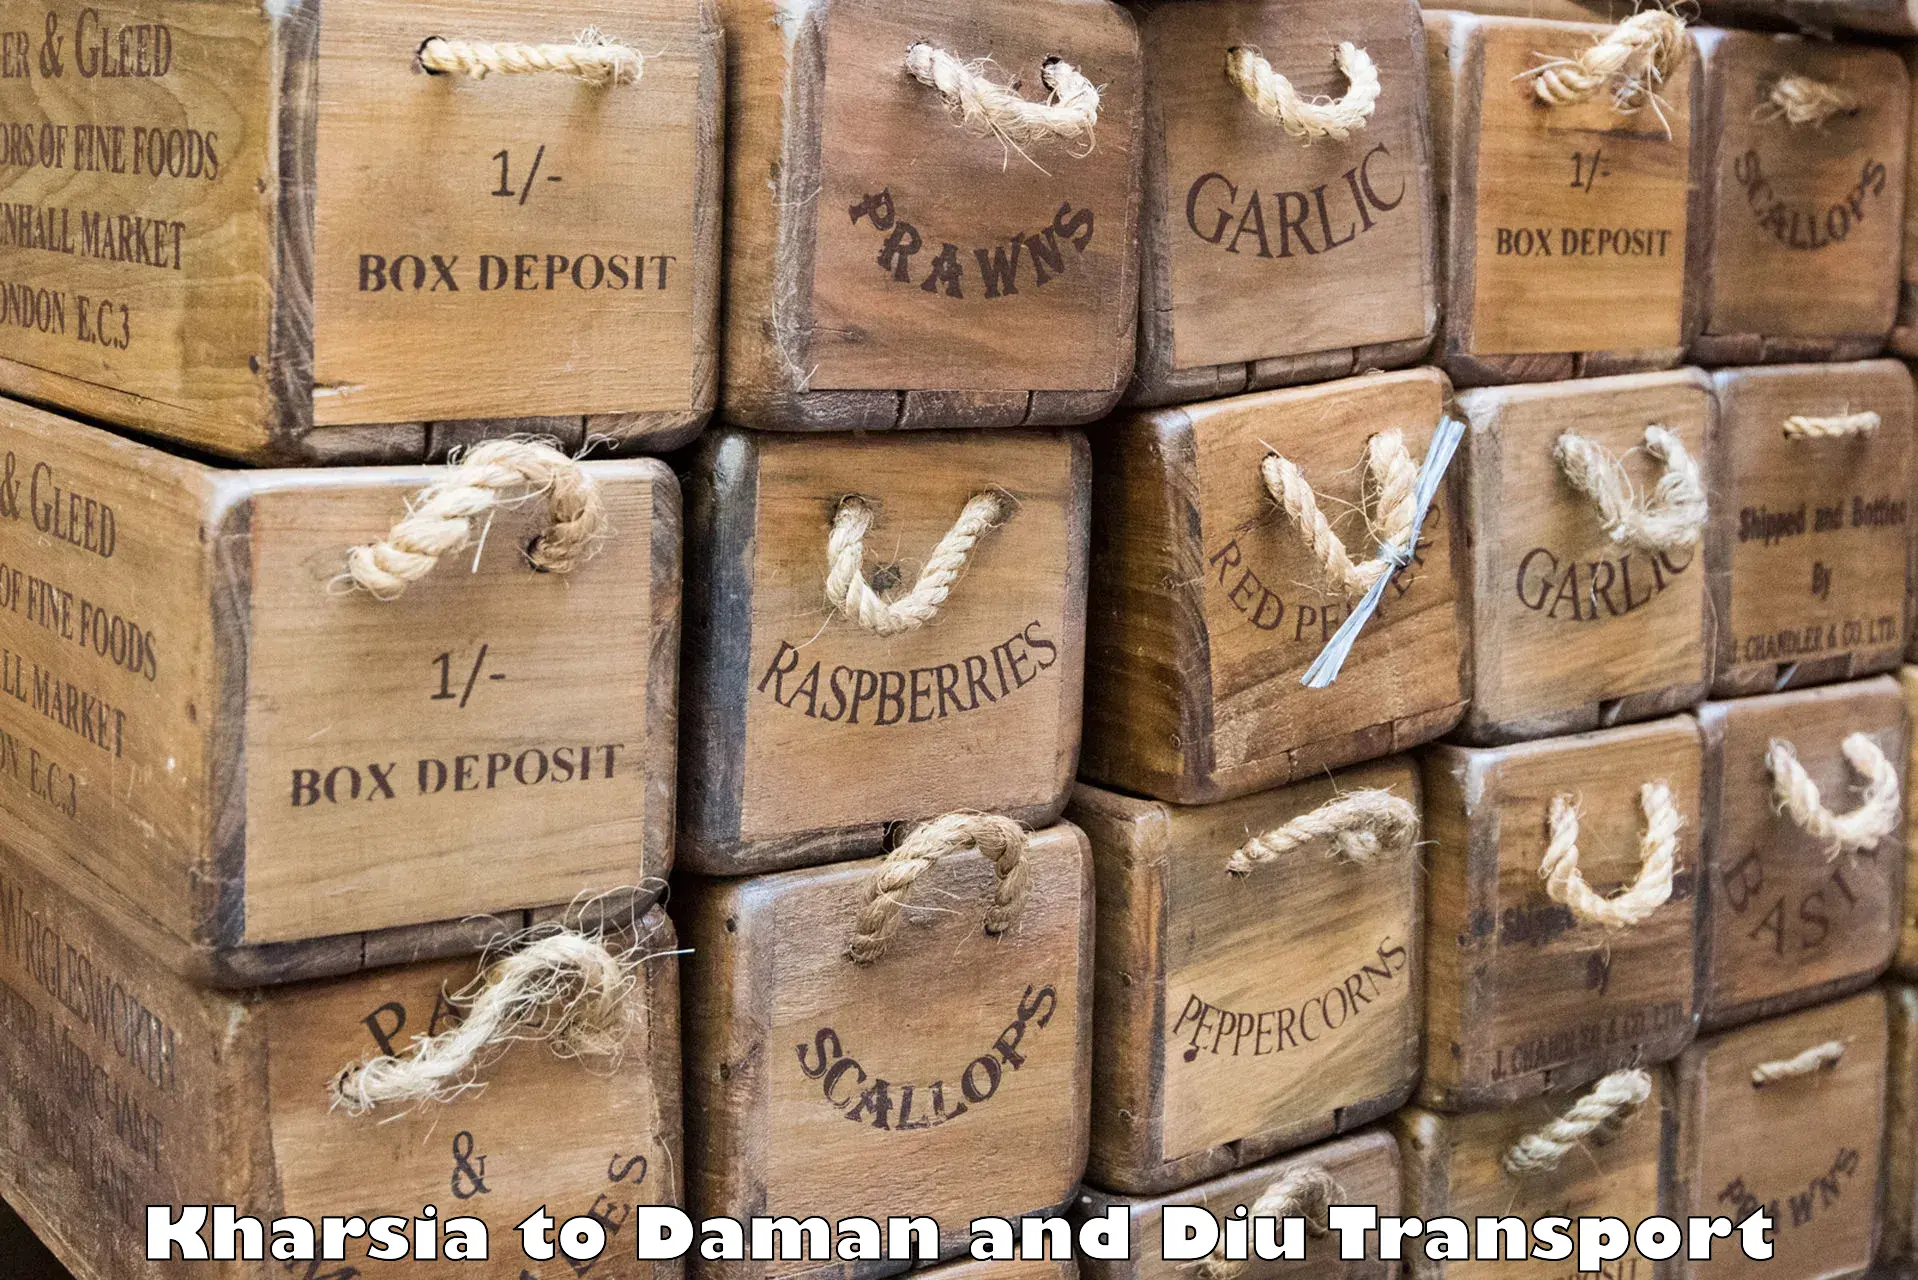 Air freight transport services Kharsia to Daman and Diu